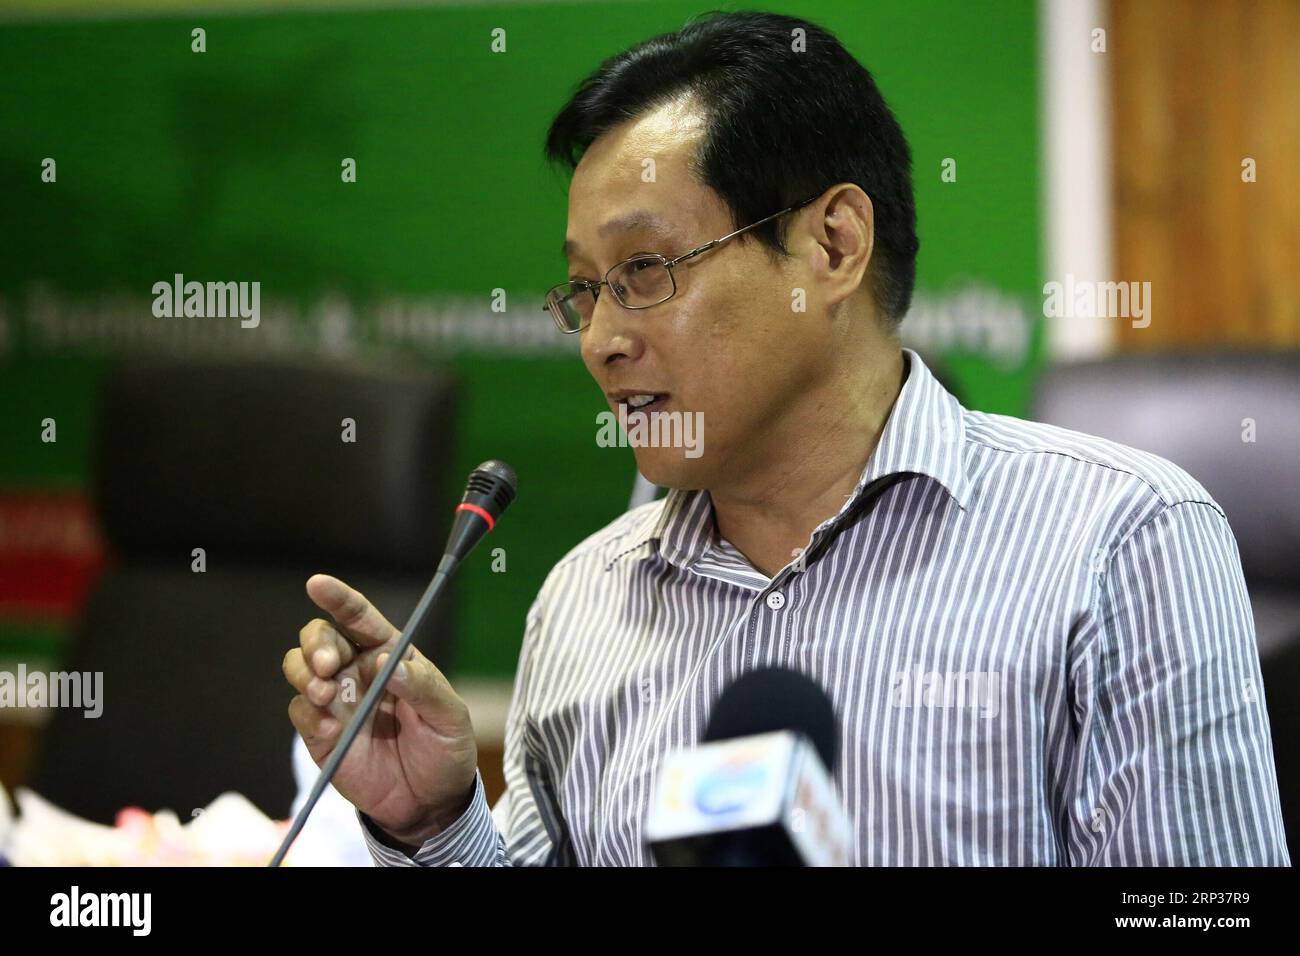 (180923) -- KHARTOUM, Sept. 23, 2018 -- Zhang Lei, a leading Chinese cotton breeding expert, speaks at the workshop in Khartoum, Sudan, on Sept. 23, 2018. Chinese and Sudanese agricultural experts held a workshop on Sunday in Khartoum, capital of Sudan, to promote cotton breeding and seeds production in the African country. )(dh) SUDAN-KHARTOUM-CHINA-AGRICULTURE MohamedxKhidir PUBLICATIONxNOTxINxCHN Stock Photo